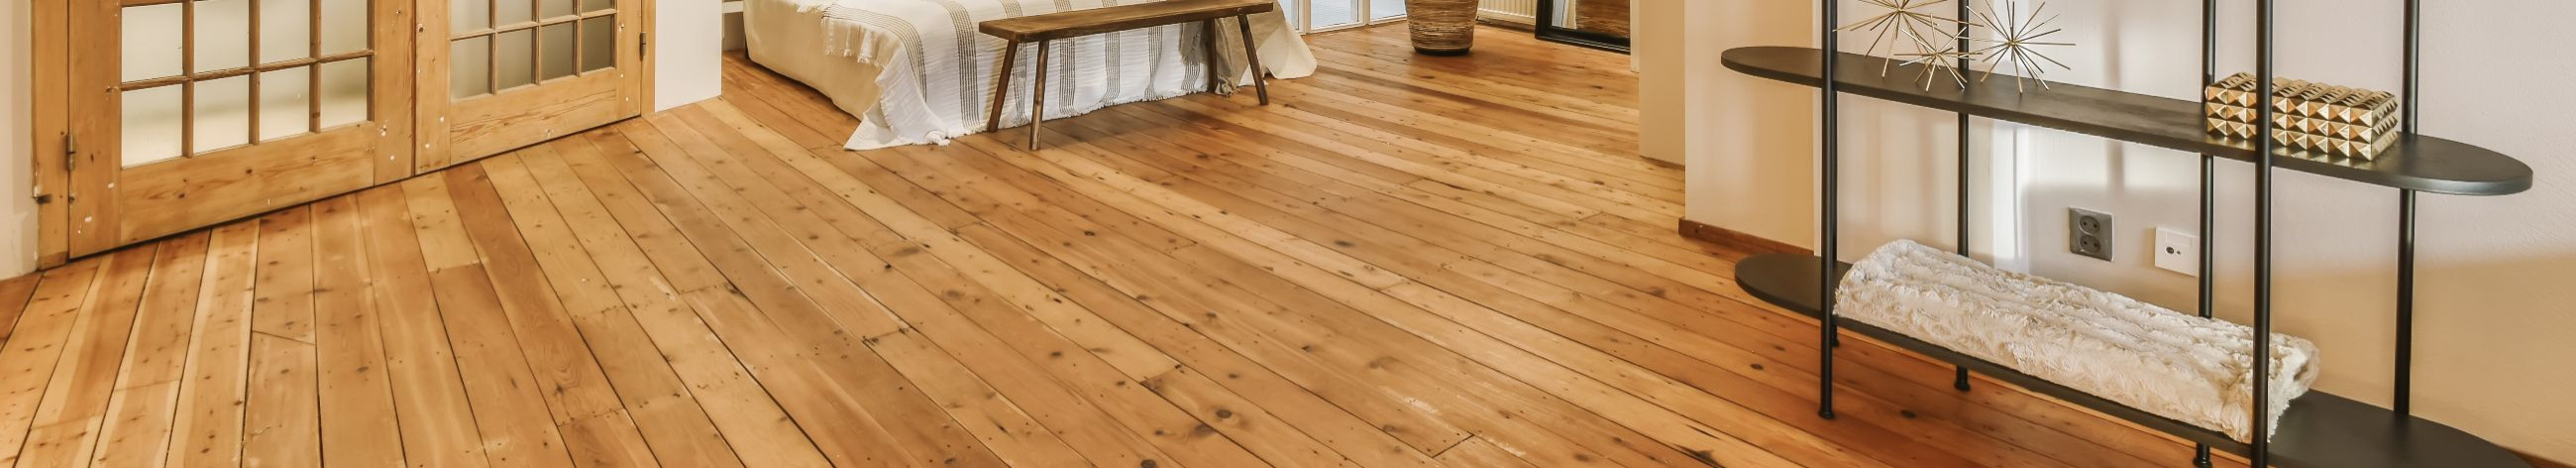 installation of wooden floors, finishing wooden floors, installation of wooden parquet, wood floor coverings, Decorative parquet, removing the old floor, installation of base layers, installation of parquet, installation of wooden floor, surface finishing